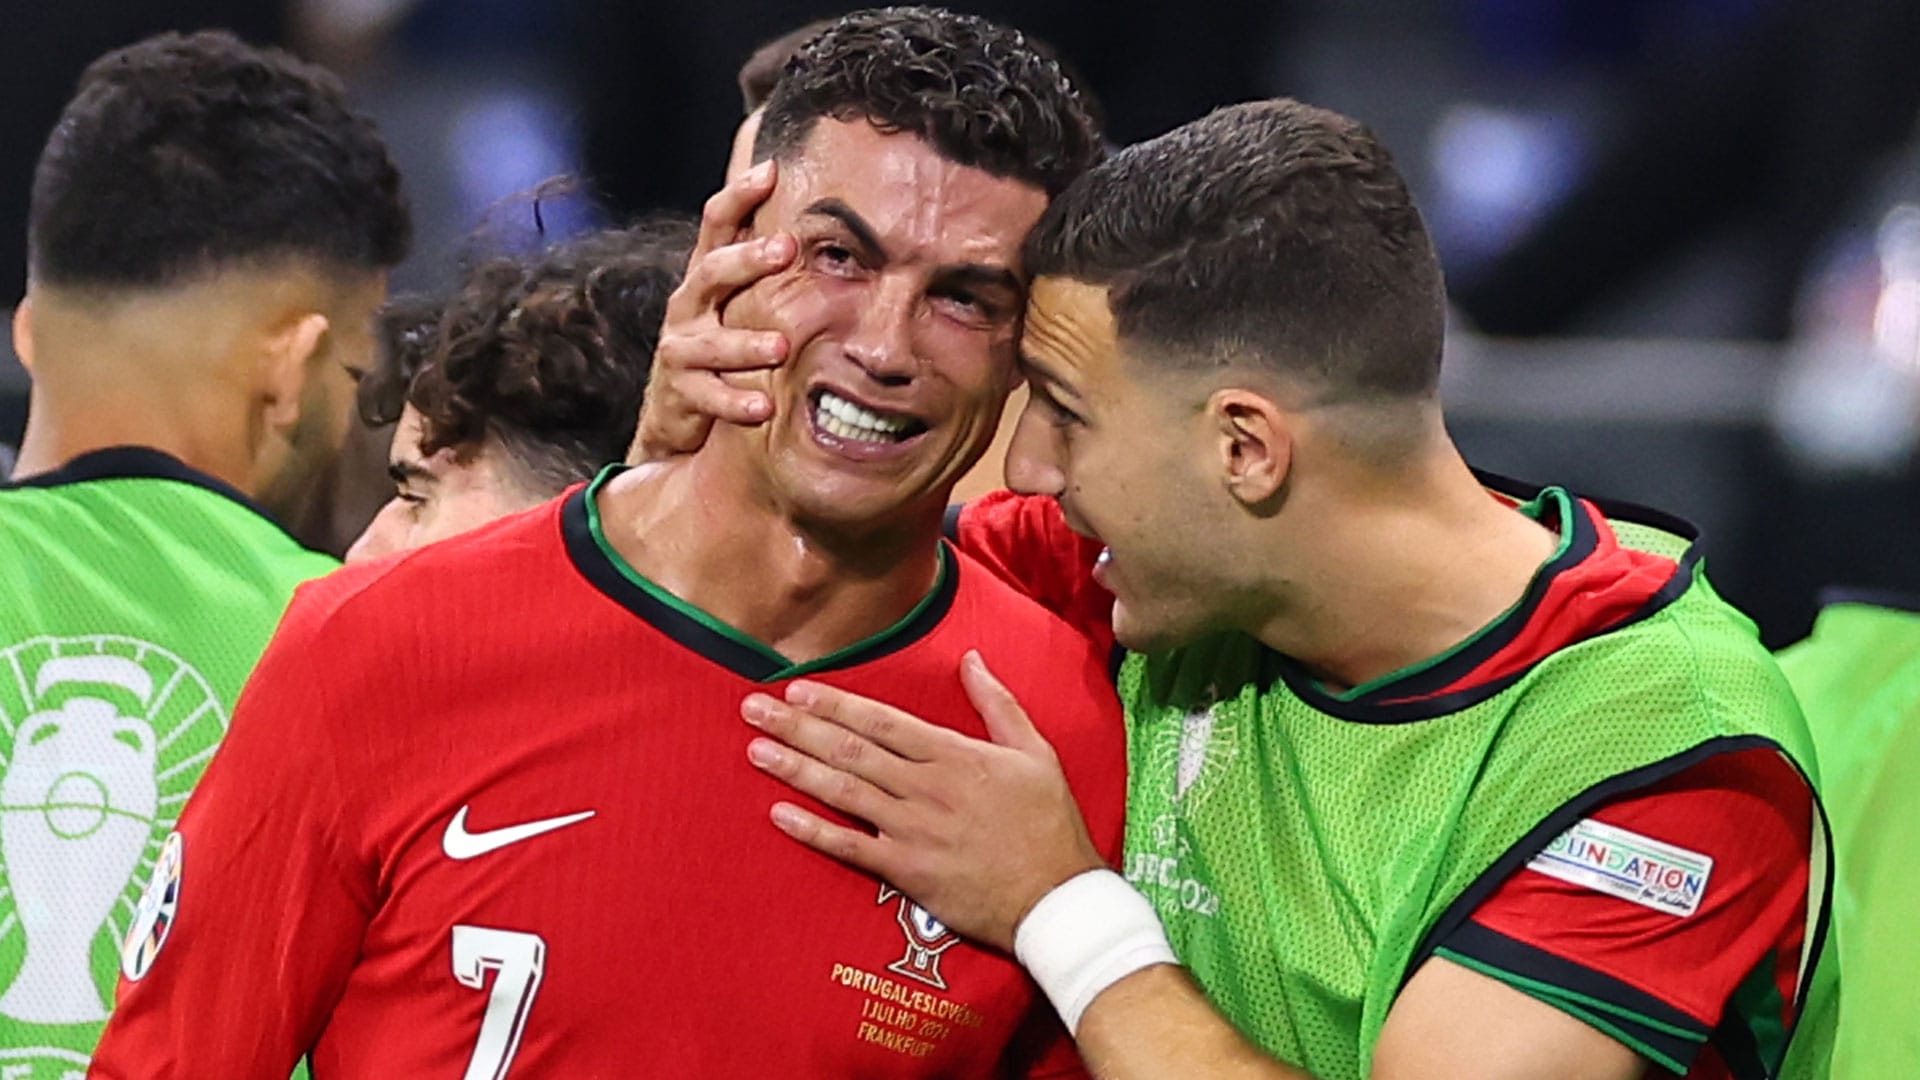 Cristiano Ronaldo breaks down in floods of tears after penalty miss vs Slovenia leaving mum distraught in stands